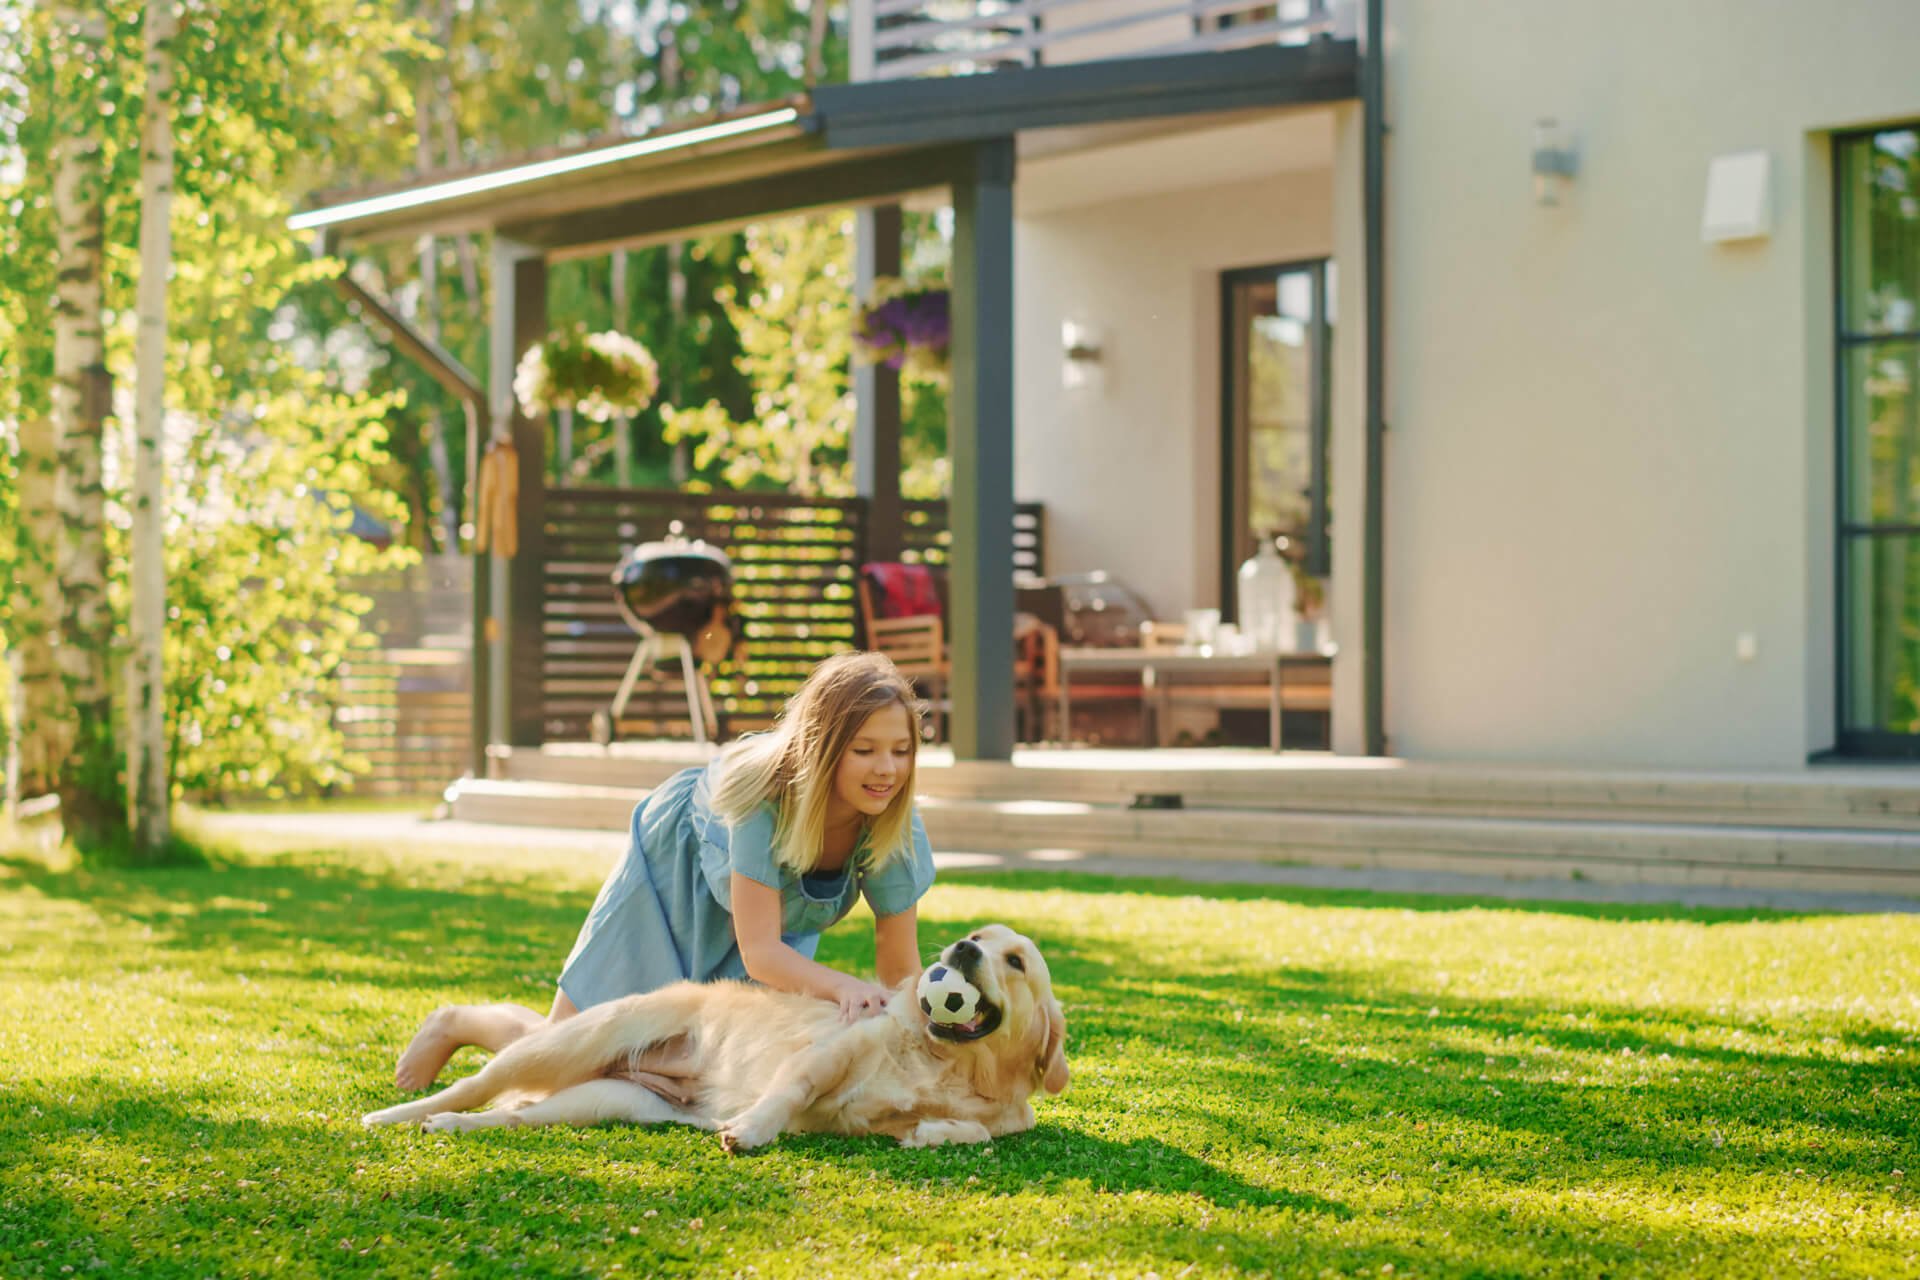 A girl playing with a dog on a lawn with a patio behind and a sitting area